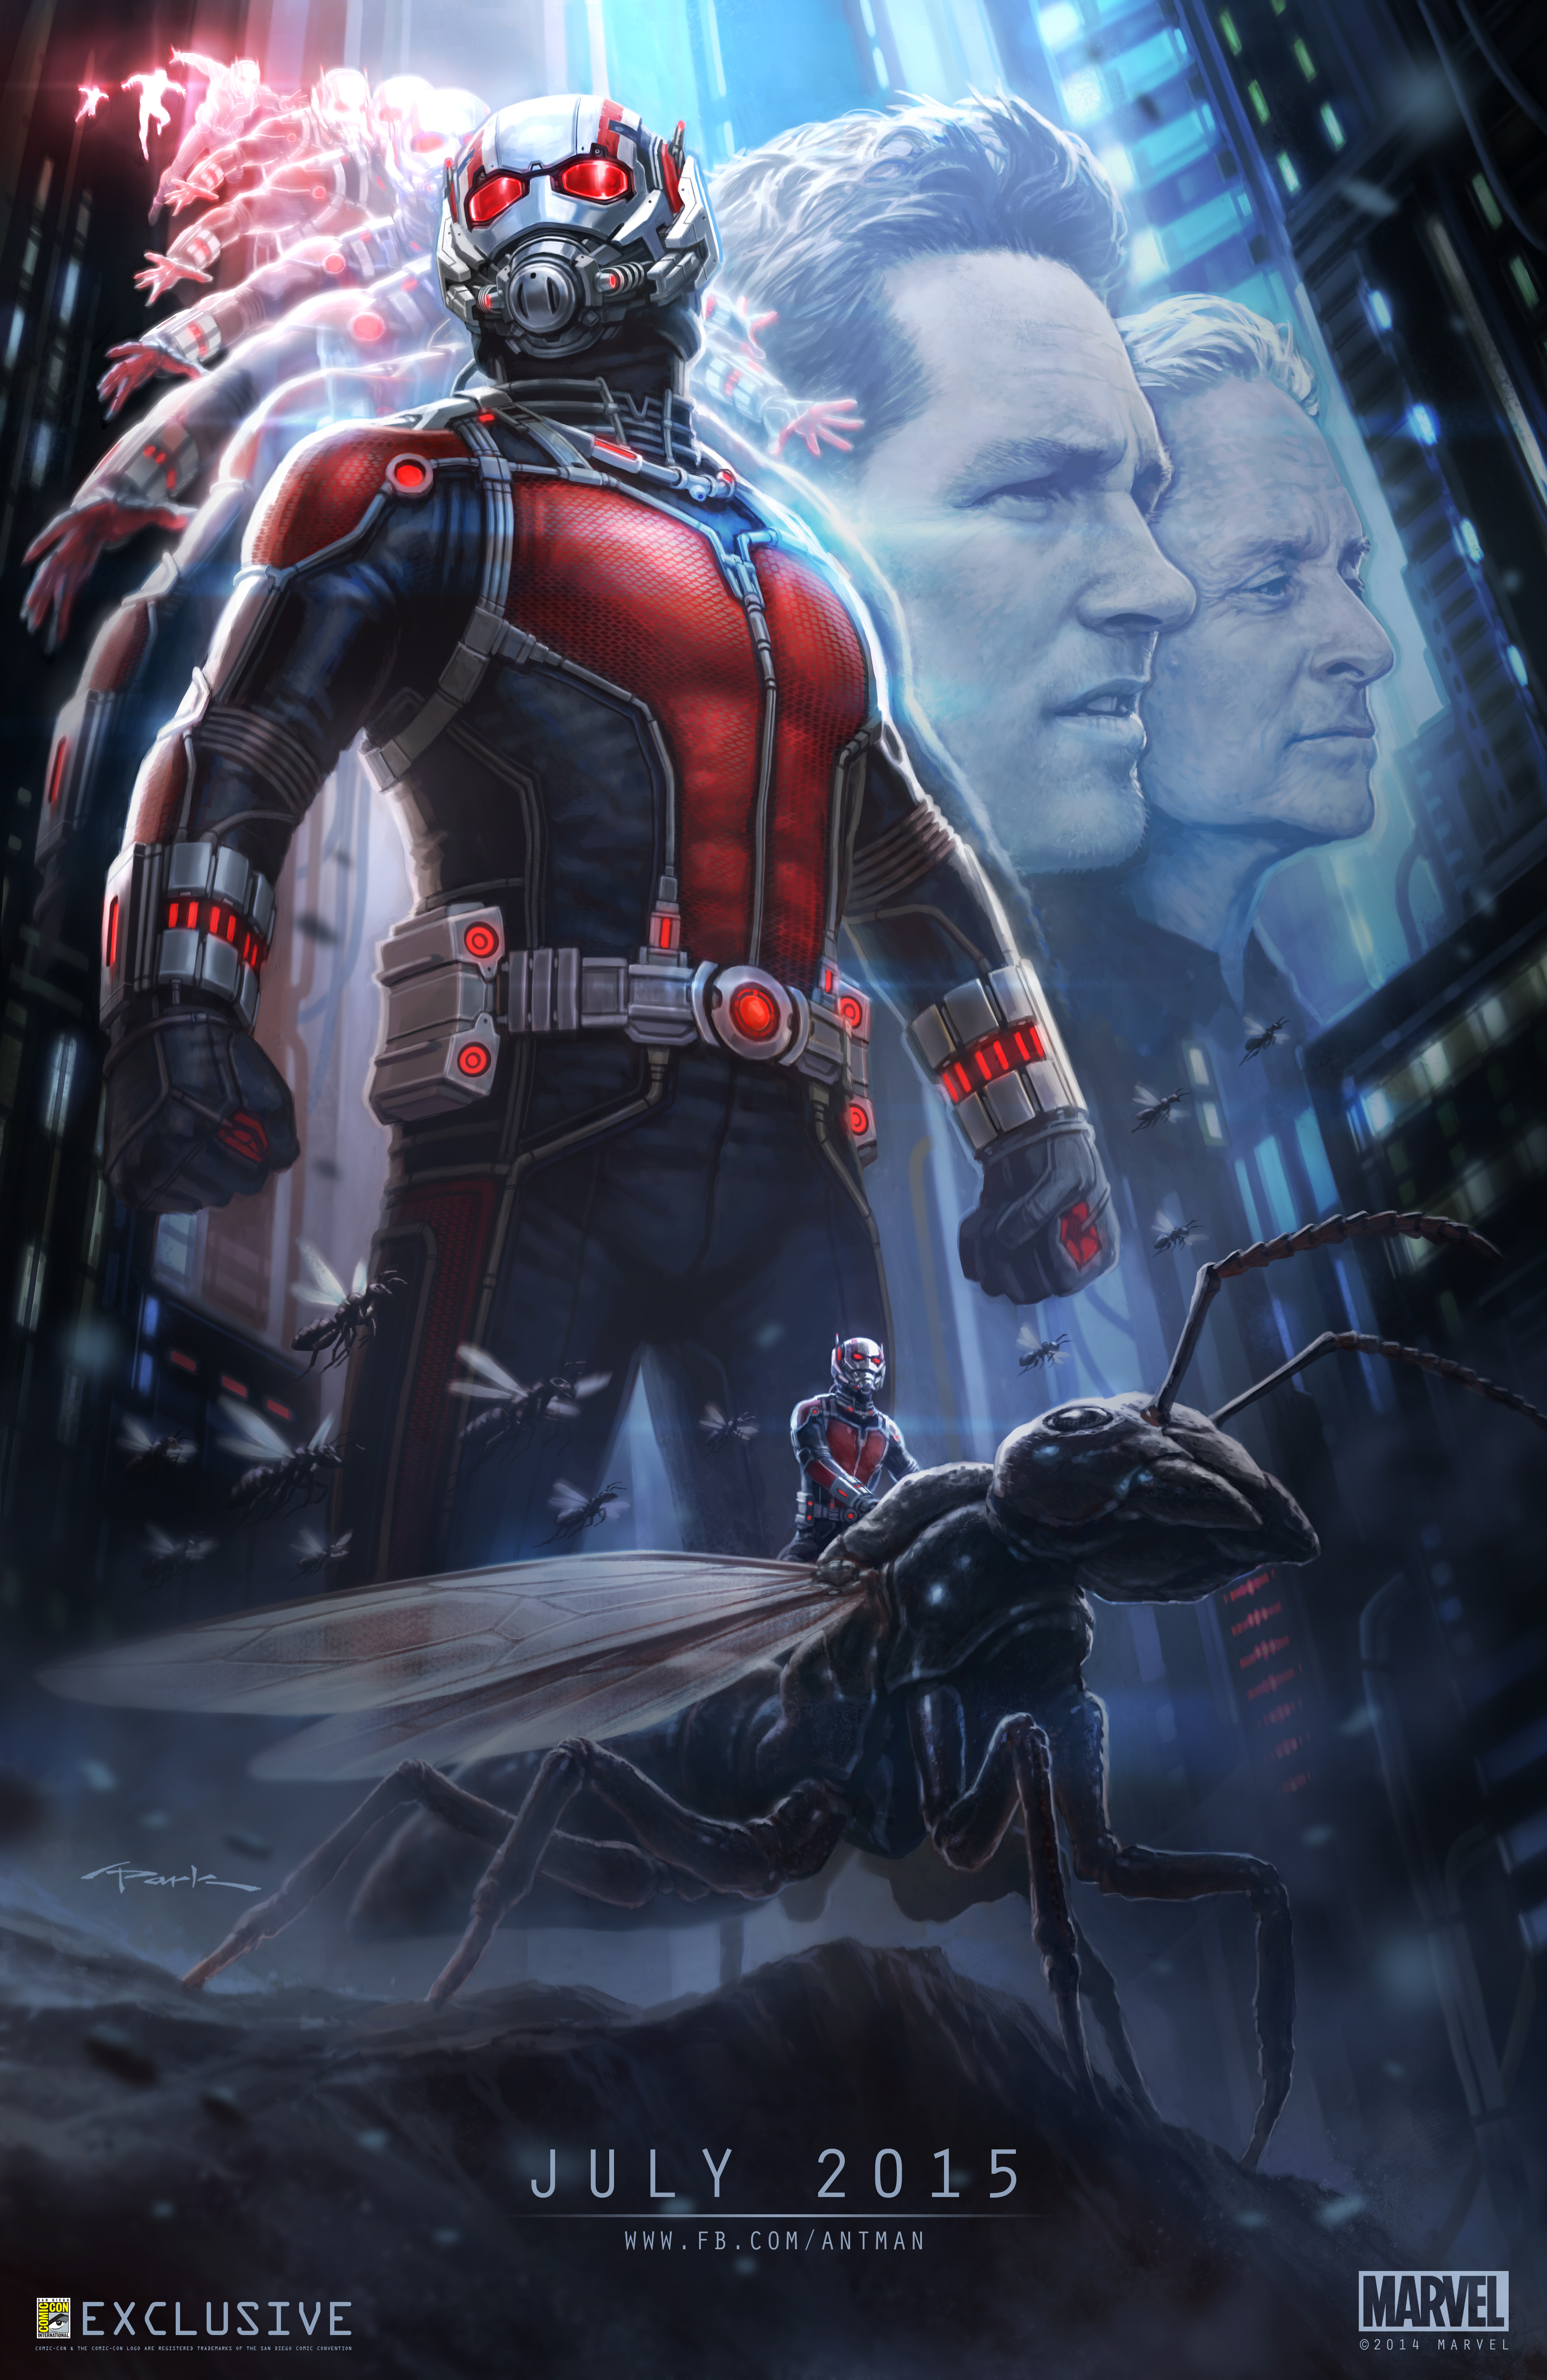 Ant-Man comes to theaters on July 17, 2015.